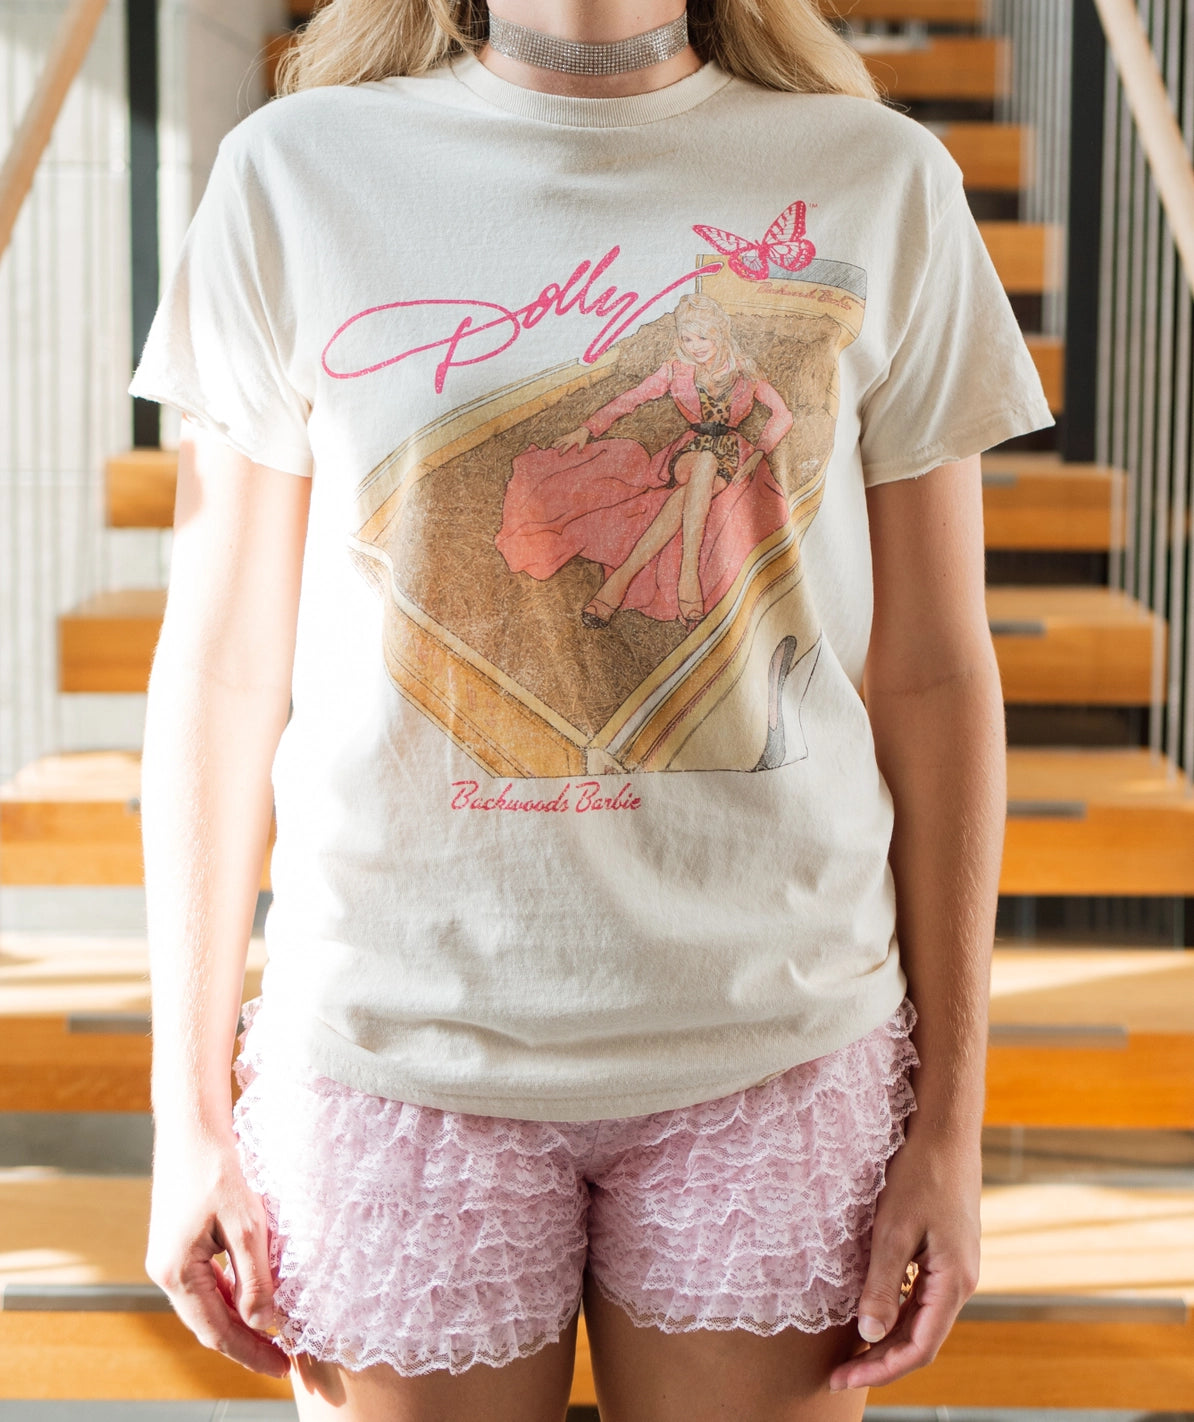 dolly parton backwoods barbie graphic t-shirt in white